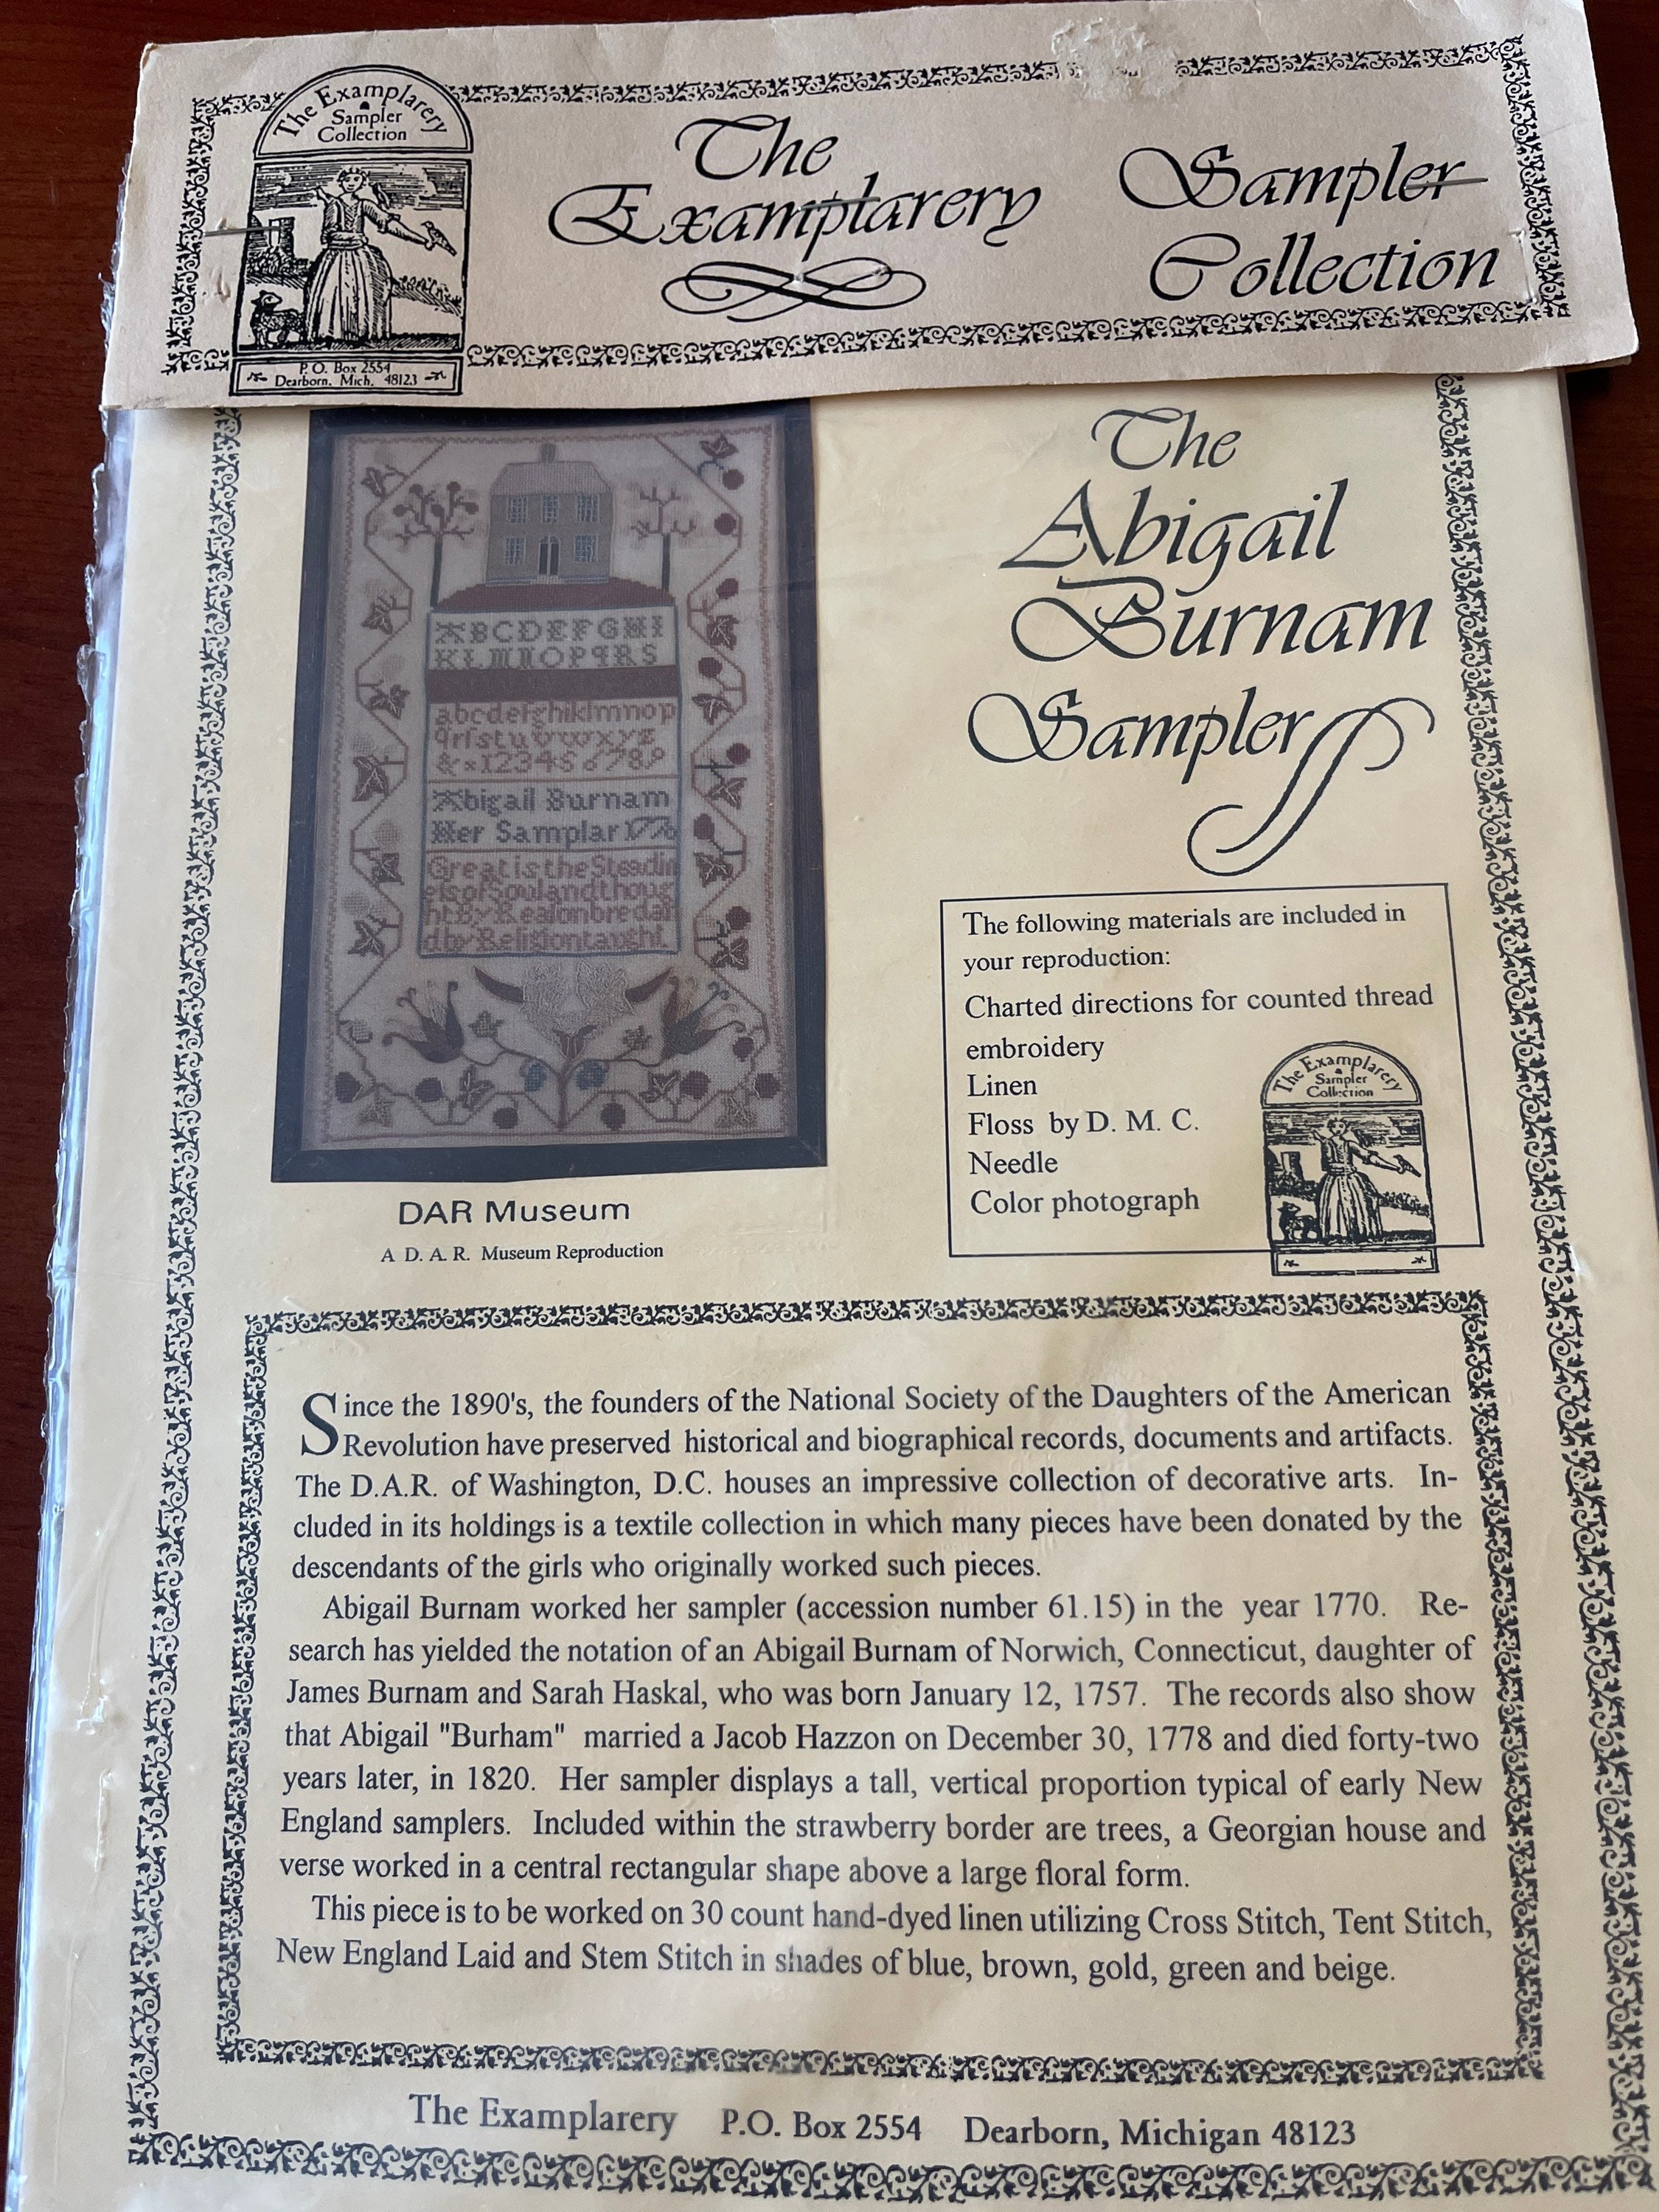 Free Shipping New in Package Counted Cross Stitch Kit F1 The Abigail Burnam Sampler The Examplarery Sampler Collection